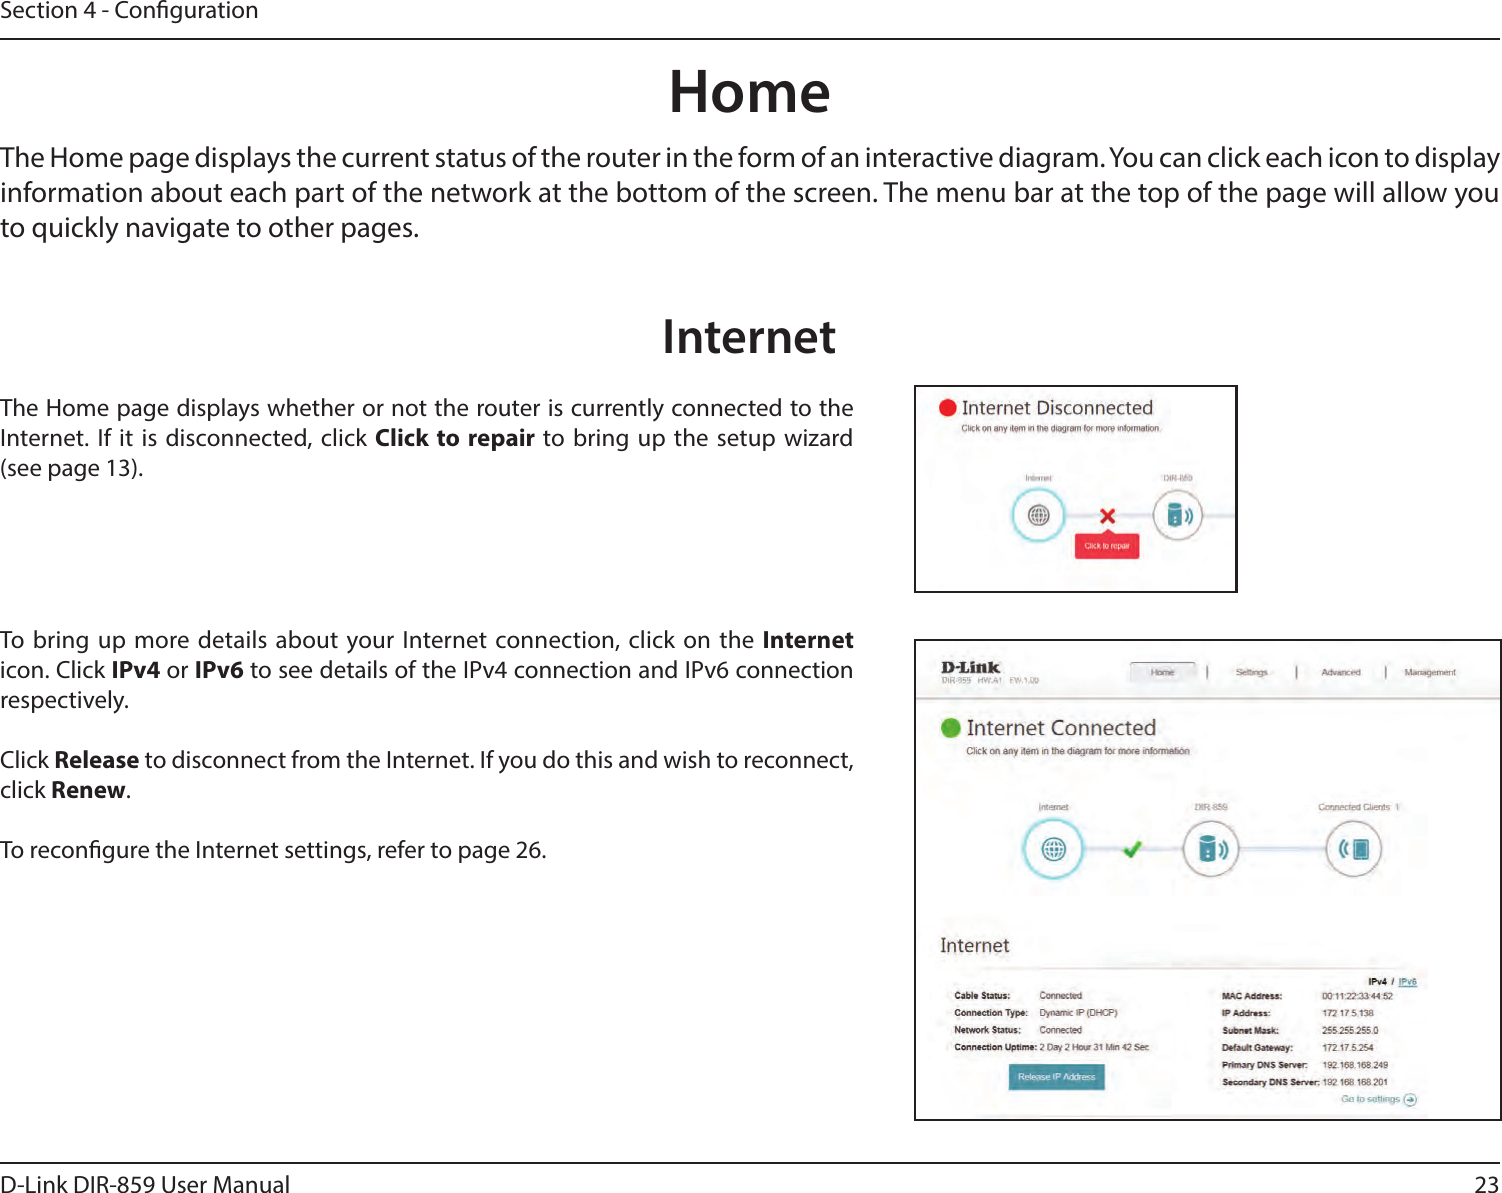 23D-Link DIR-859 User ManualSection 4 - CongurationHomeThe Home page displays the current status of the router in the form of an interactive diagram. You can click each icon to display information about each part of the network at the bottom of the screen. The menu bar at the top of the page will allow you to quickly navigate to other pages.The Home page displays whether or not the router is currently connected to the Internet. If it is disconnected, click Click to repair to bring up the setup wizard  (see page 13).To bring up more details about your Internet connection, click on the Internet icon. Click IPv4 or IPv6 to see details of the IPv4 connection and IPv6 connection respectively.Click Release to disconnect from the Internet. If you do this and wish to reconnect, click Renew.To recongure the Internet settings, refer to page 26.Internet